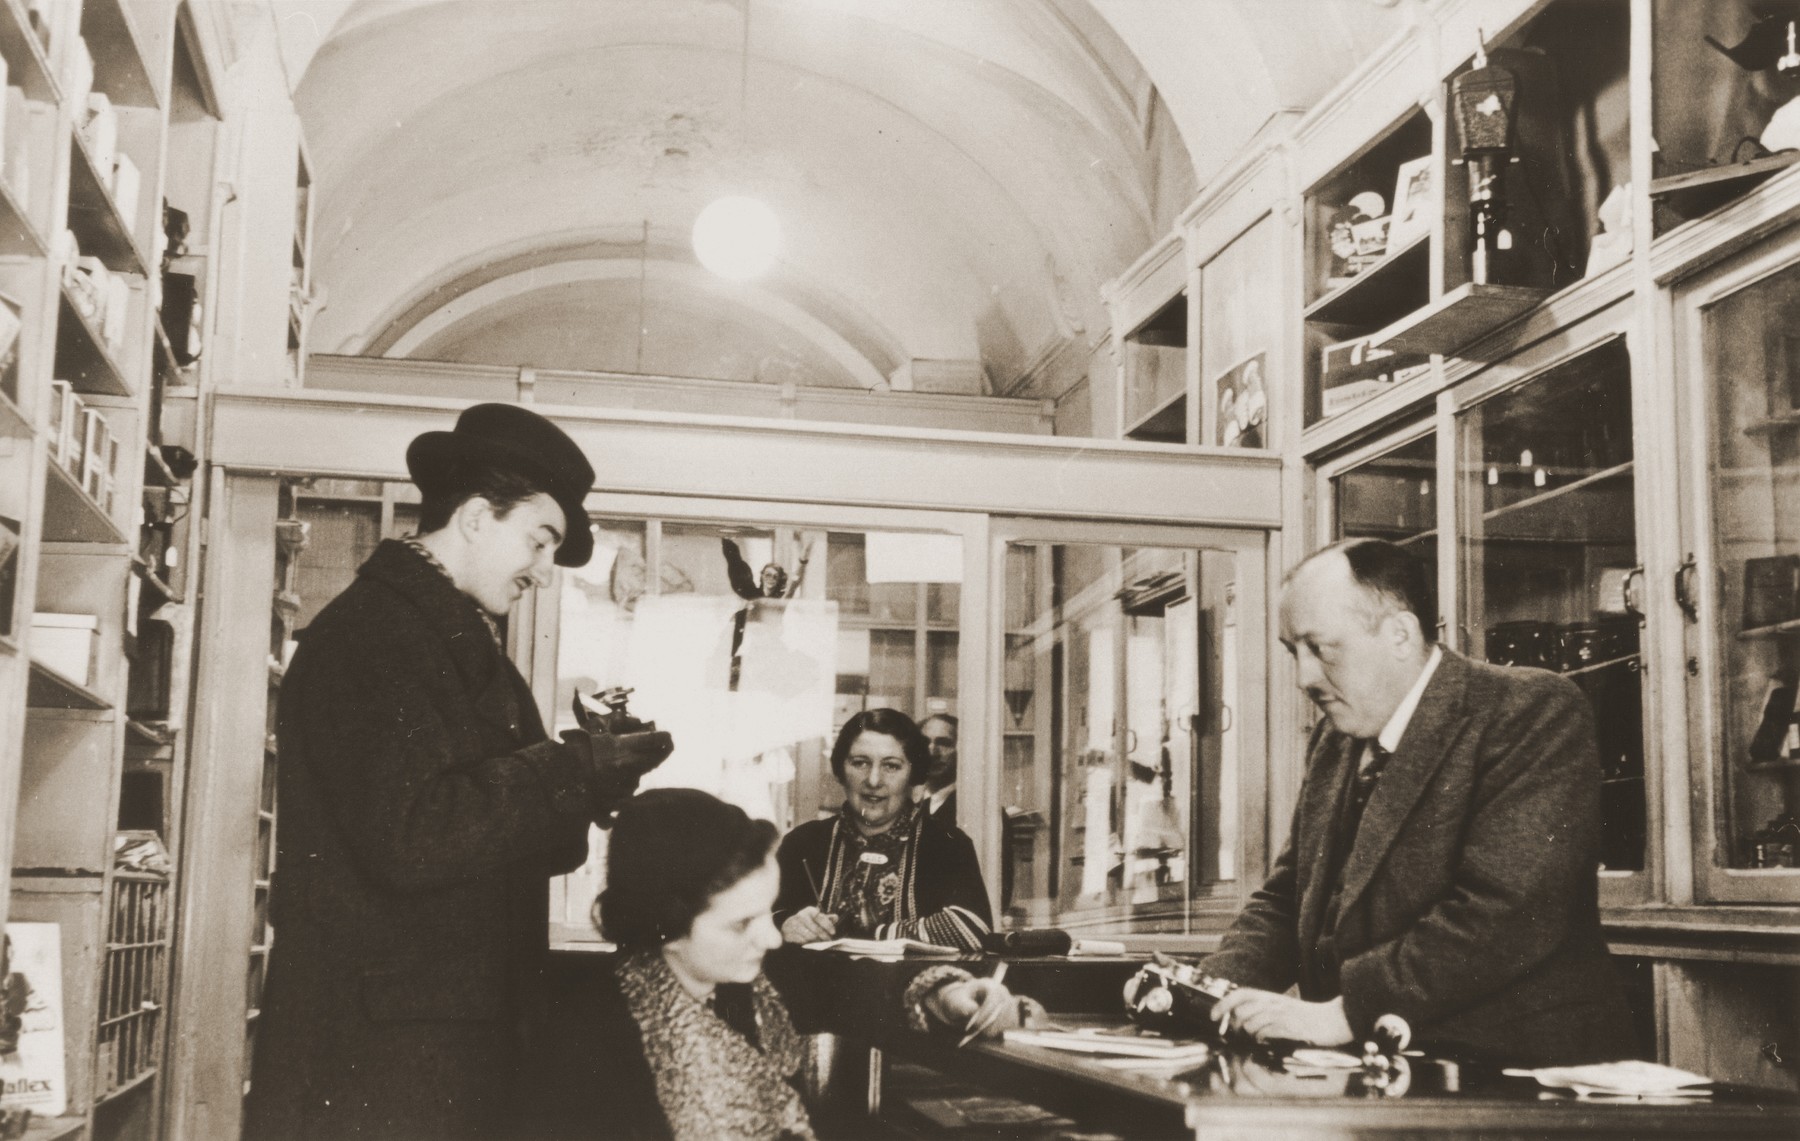 Raffael Brenner assists customers in his photography shop in Rome.